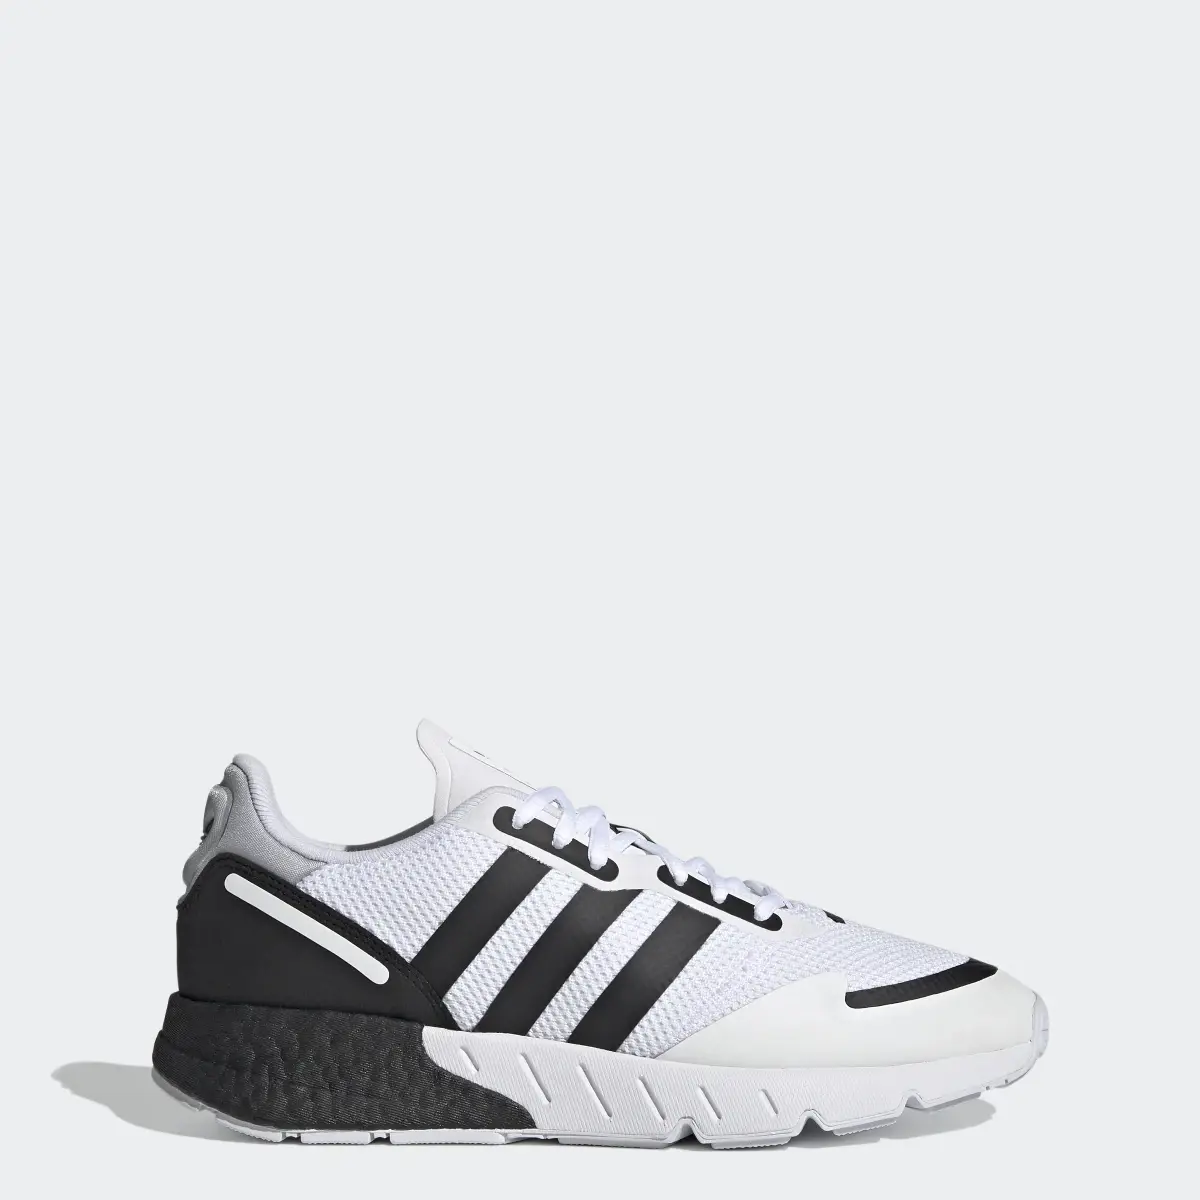 Adidas ZX 1K Boost Shoes. 1